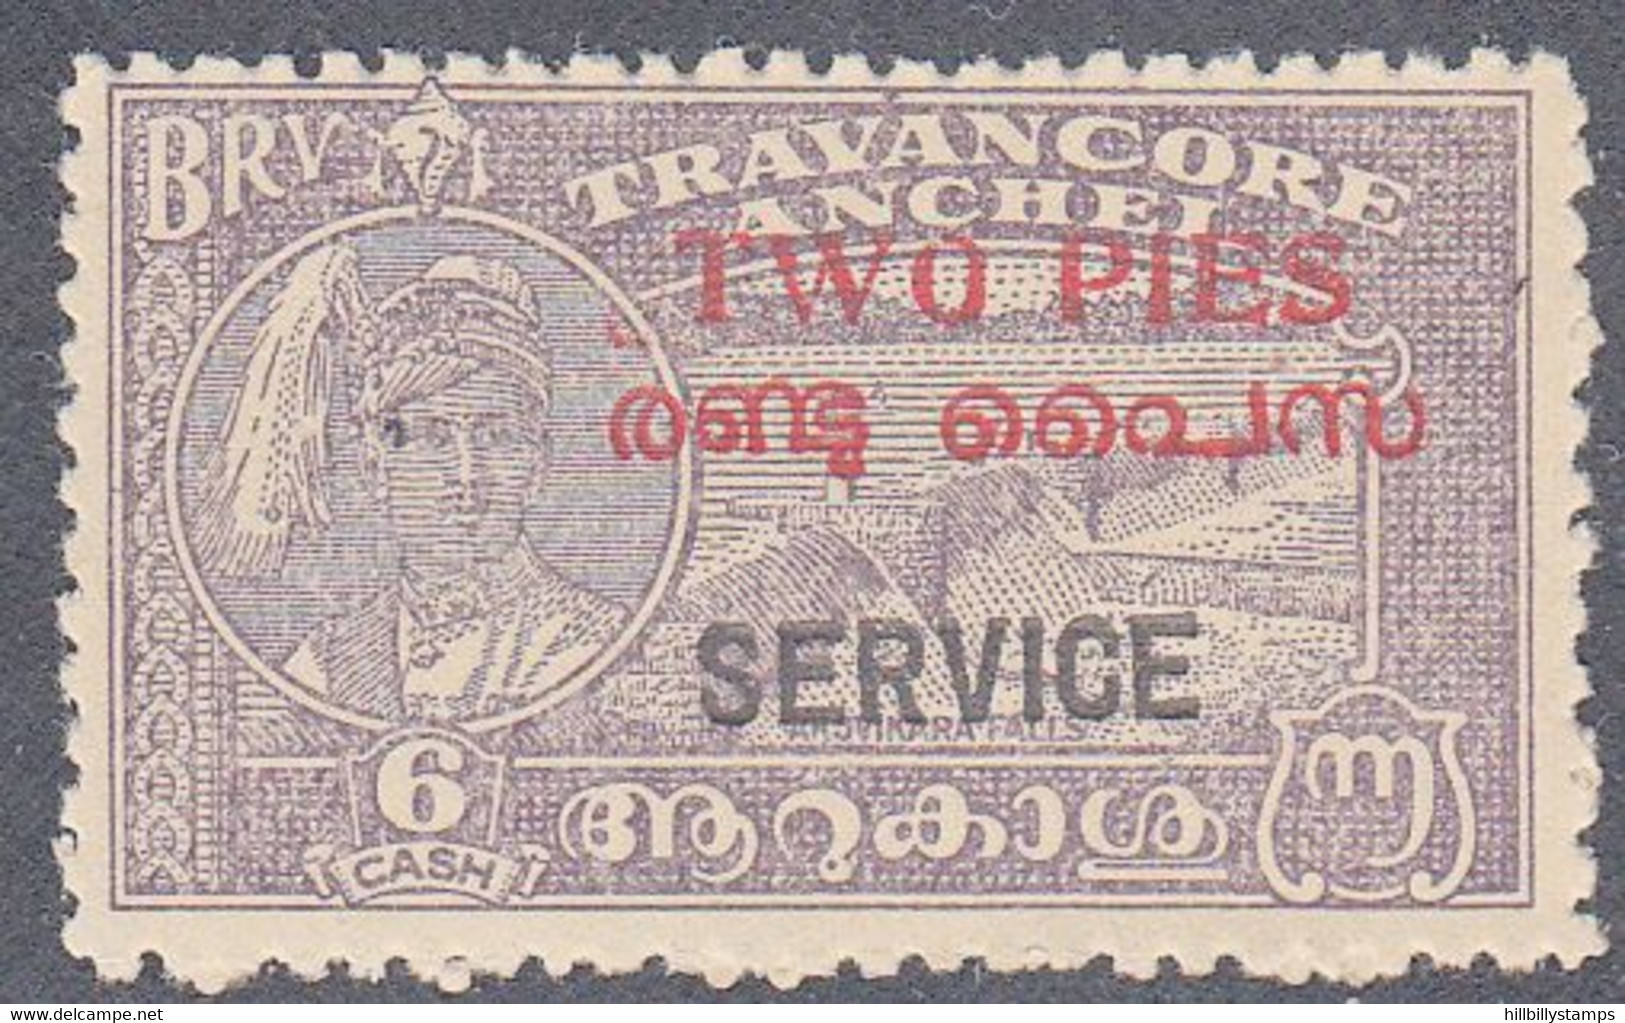 INDIA  -COCHIN   SCOTT NO 022 C   USED  YEAR  1951   PERF 12 - Poontch